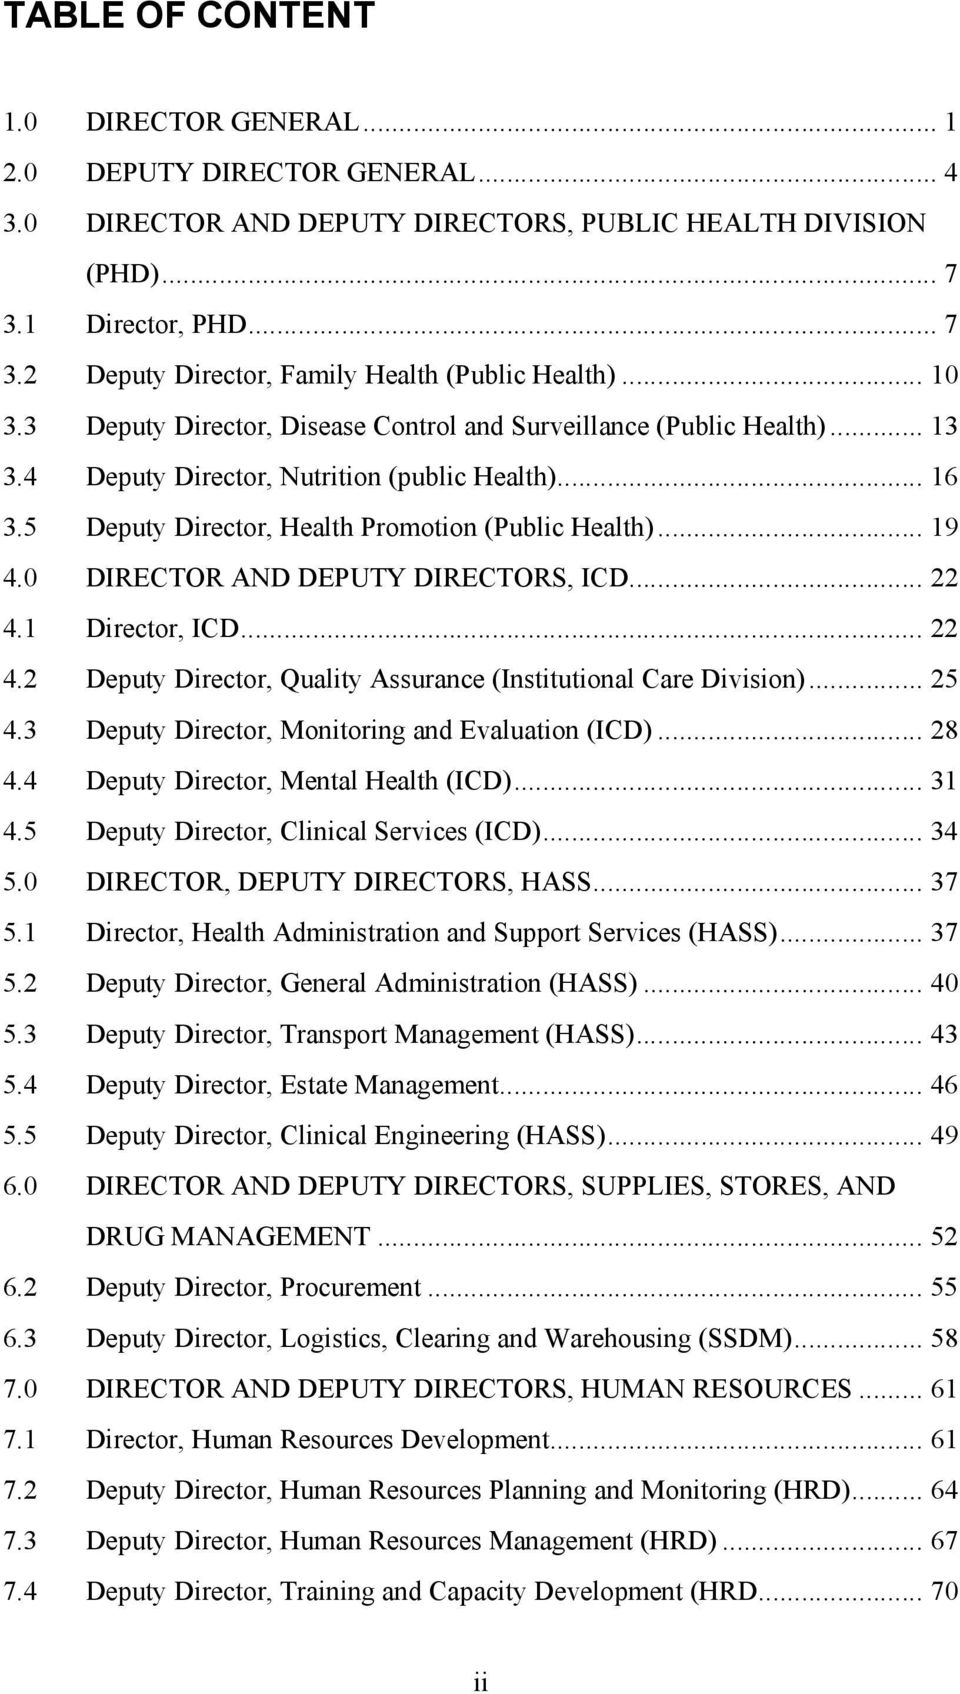 0 DIRECTOR AND DEPUTY DIRECTORS, ICD... 22 4.1 Directr, ICD... 22 4.2 Deputy Directr, Quality Assurance (Institutinal Care Divisin)... 25 4.3 Deputy Directr, Mnitring and Evaluatin (ICD)... 28 4.